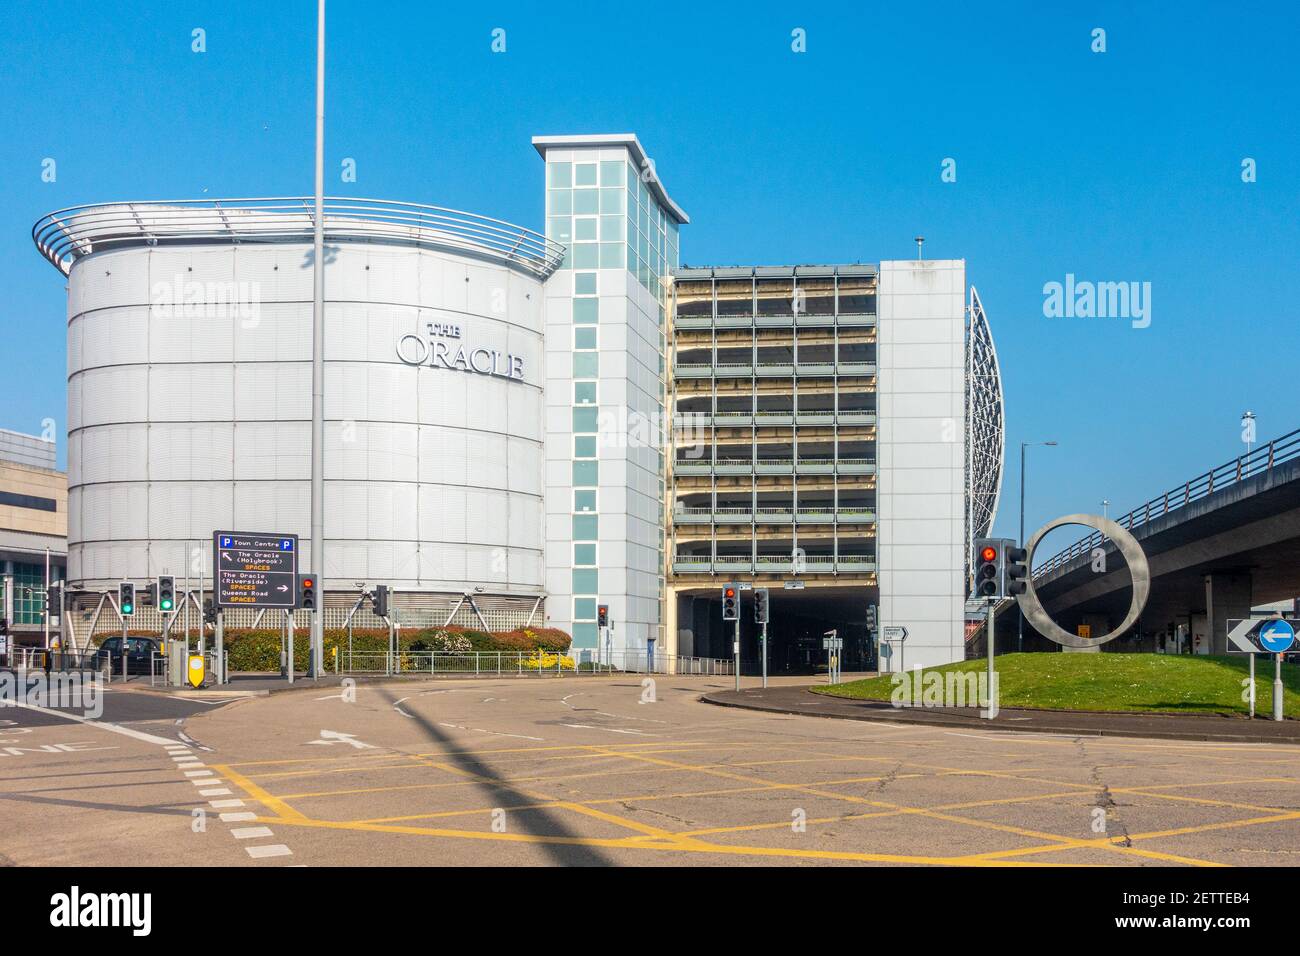 The Oracle shopping centre and multi-storey car park in Reading, UK Stock  Photo - Alamy